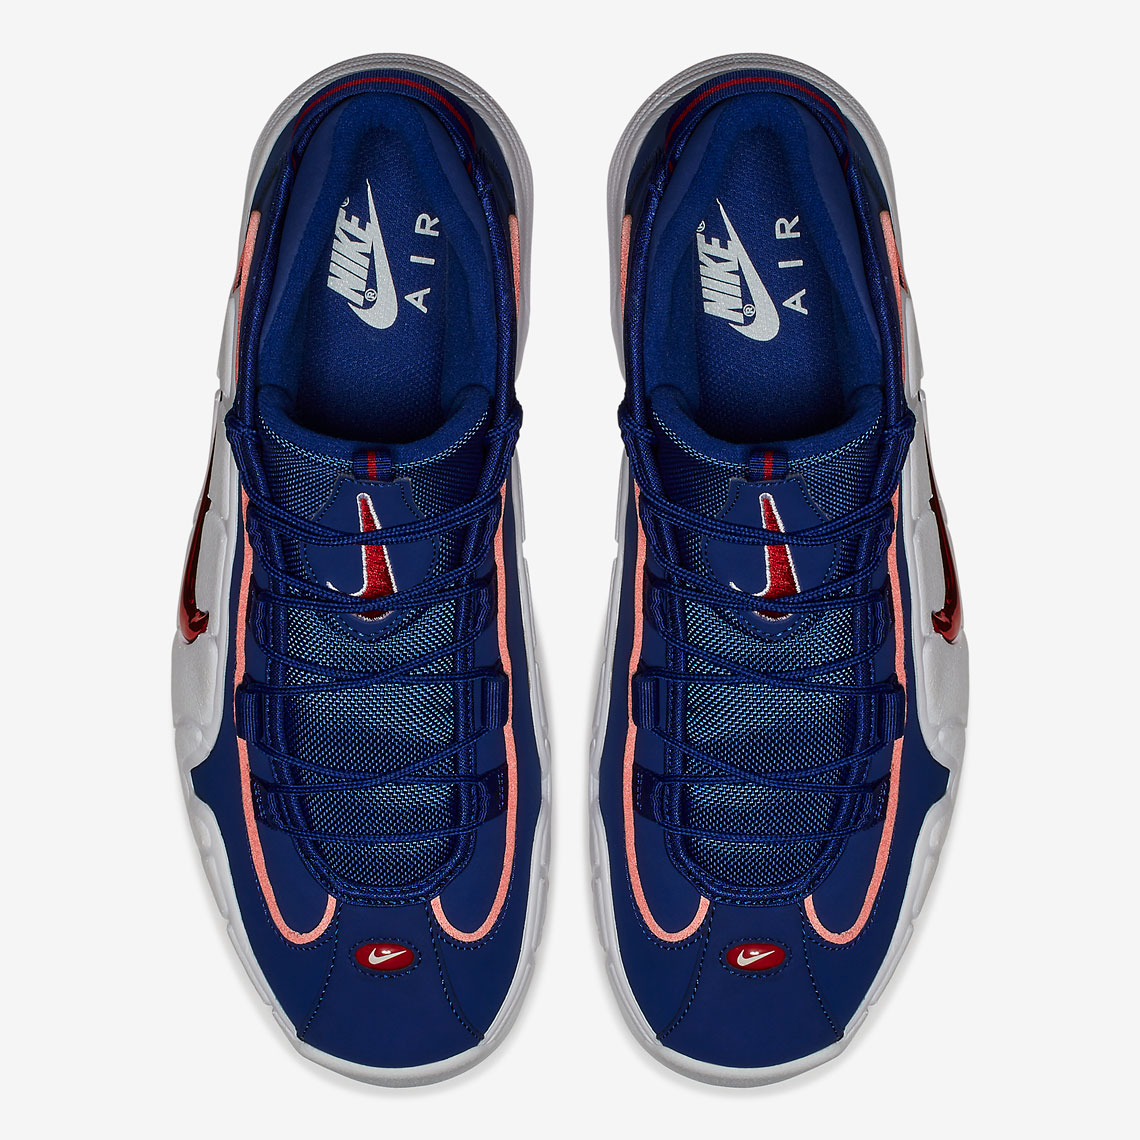 Nike Air Max Penny 1 Lil Penny Release 